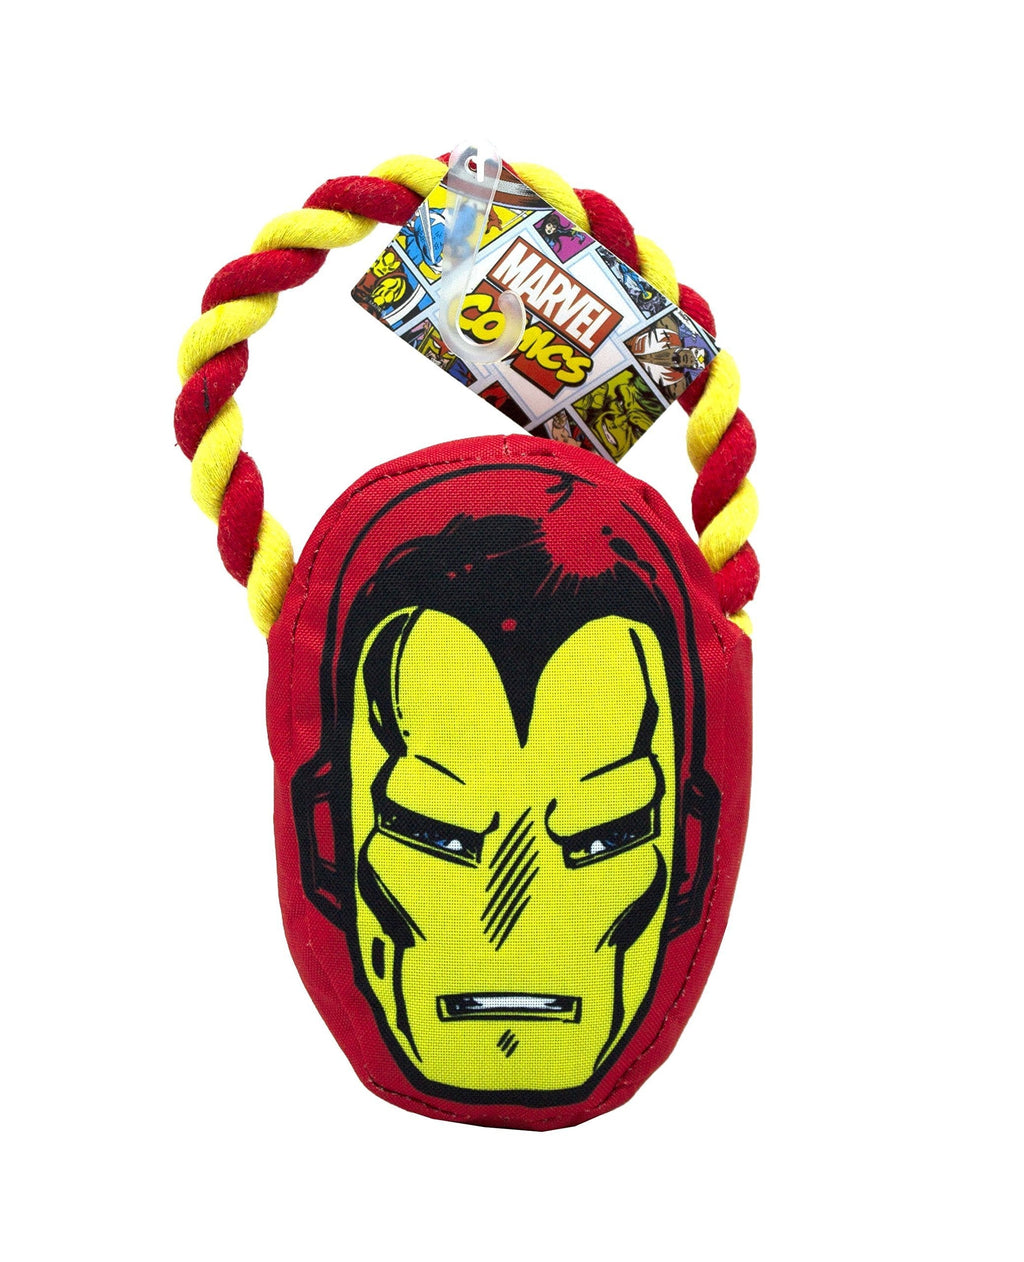 [Australia] - Marvel Comics Rope Pull Toy For Dogs | Super Hero Toys For All Dogs and Puppies | Fun and Adorable Squeak Dog Toys in Captain America, Hulk, Iron Man, Spiderman Varieties 